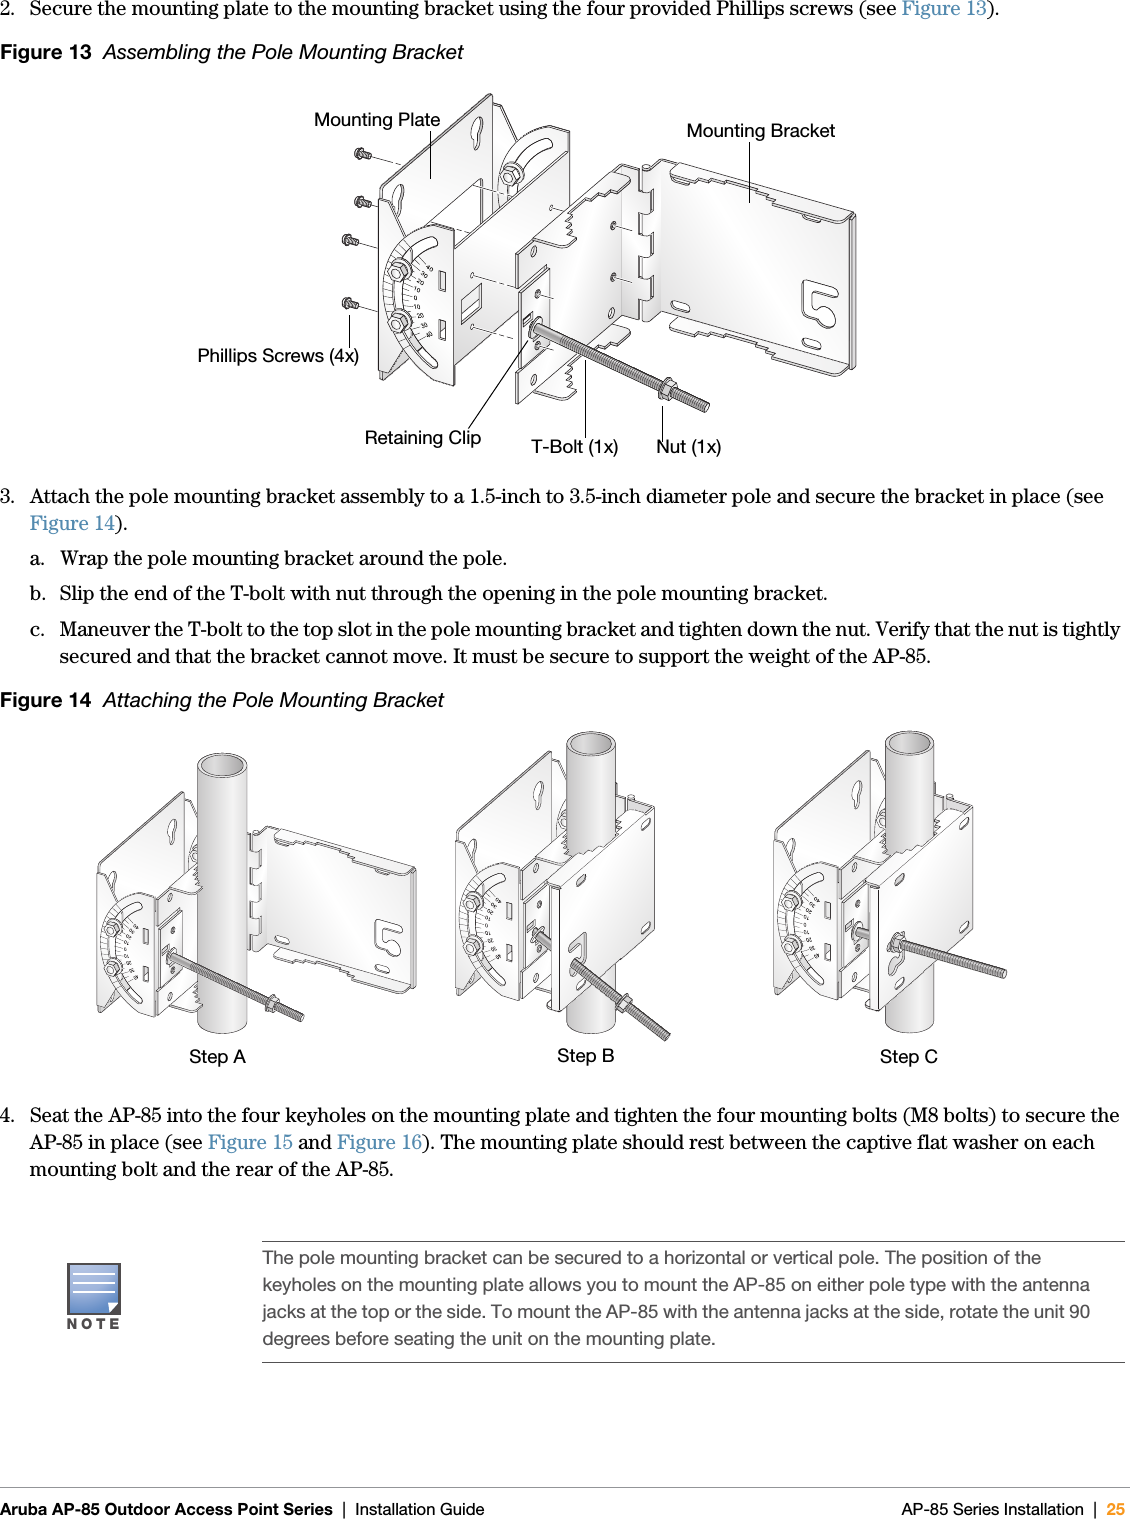  Aruba AP-85 Outdoor Access Point Series | Installation Guide AP-85 Series Installation | 252. Secure the mounting plate to the mounting bracket using the four provided Phillips screws (see Figure 13).Figure 13  Assembling the Pole Mounting Bracket3. Attach the pole mounting bracket assembly to a 1.5-inch to 3.5-inch diameter pole and secure the bracket in place (see Figure 14).a. Wrap the pole mounting bracket around the pole.b. Slip the end of the T-bolt with nut through the opening in the pole mounting bracket.c. Maneuver the T-bolt to the top slot in the pole mounting bracket and tighten down the nut. Verify that the nut is tightly secured and that the bracket cannot move. It must be secure to support the weight of the AP-85.Figure 14  Attaching the Pole Mounting Bracket4. Seat the AP-85 into the four keyholes on the mounting plate and tighten the four mounting bolts (M8 bolts) to secure the AP-85 in place (see Figure 15 and Figure 16). The mounting plate should rest between the captive flat washer on each mounting bolt and the rear of the AP-85.NOTEThe pole mounting bracket can be secured to a horizontal or vertical pole. The position of the keyholes on the mounting plate allows you to mount the AP-85 on either pole type with the antenna jacks at the top or the side. To mount the AP-85 with the antenna jacks at the side, rotate the unit 90 degrees before seating the unit on the mounting plate.arun_0137Nut (1x)T-Bolt (1x)Phillips Screws (4x)Mounting BracketMounting PlateRetaining Cliparun_0129arun_0130arun_0130Step A Step CStep B